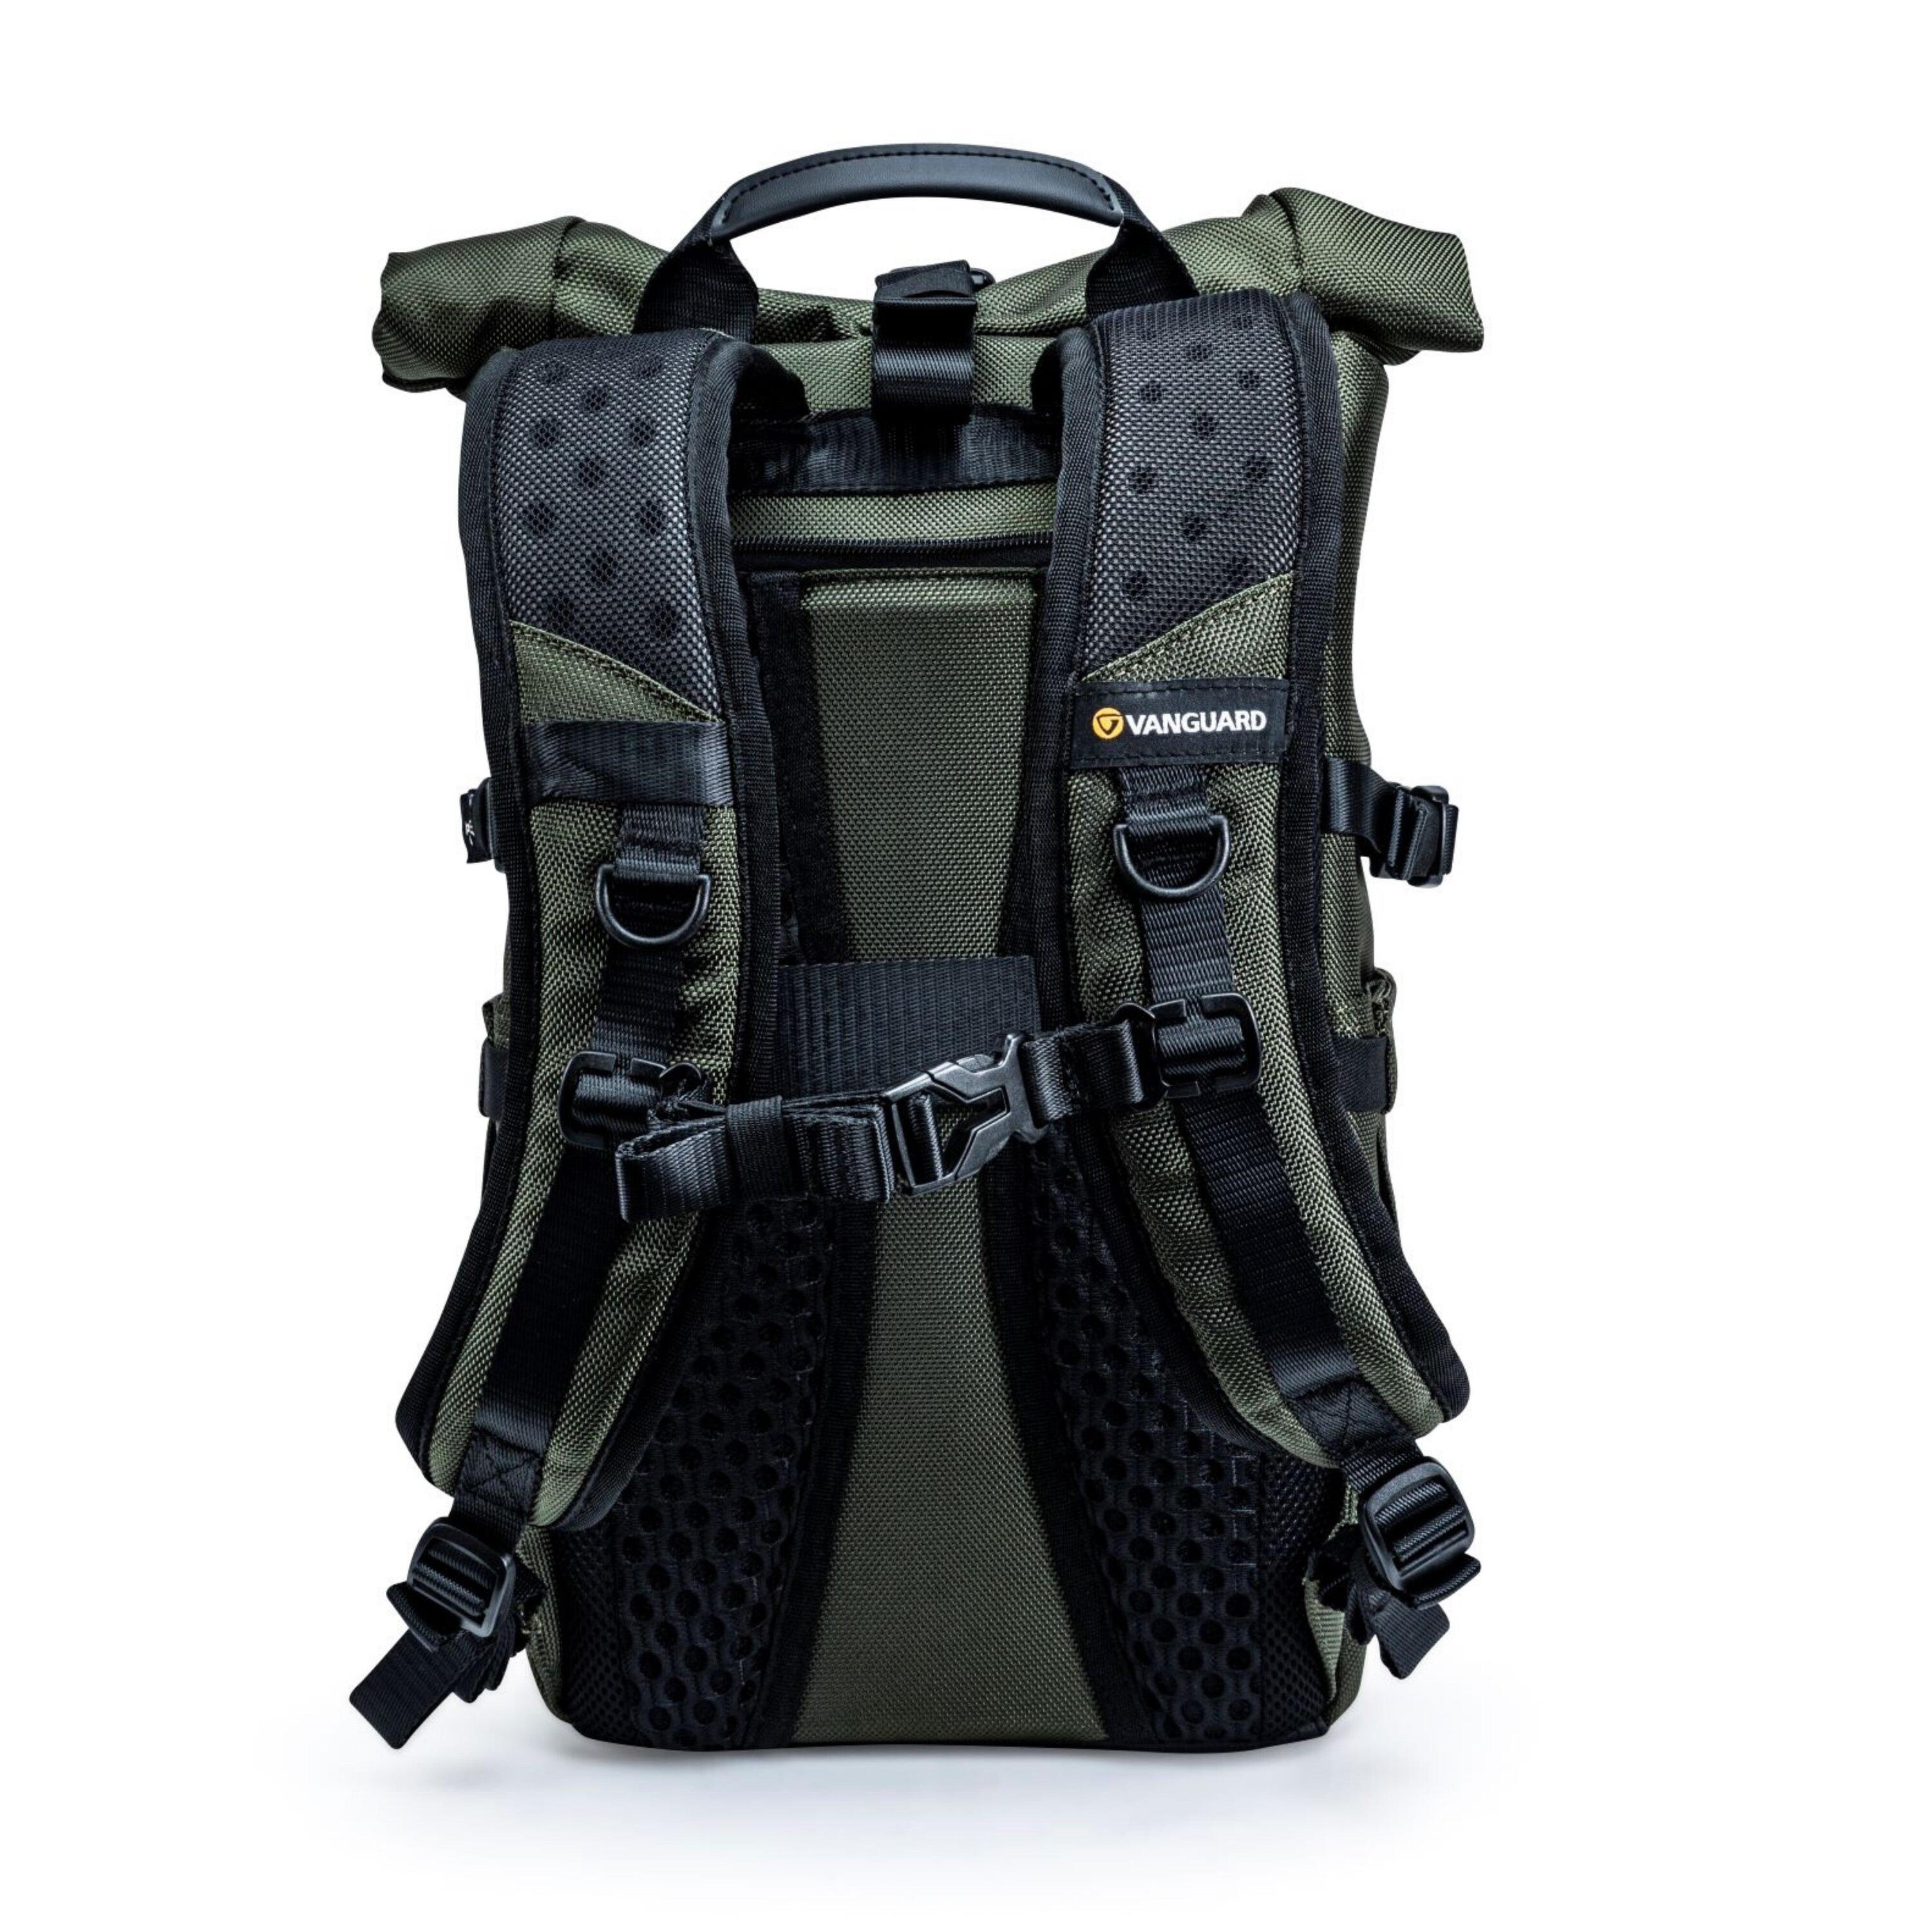 VEO Select 43RB GR - Roll-Top Camera Backpack - Green 4/5